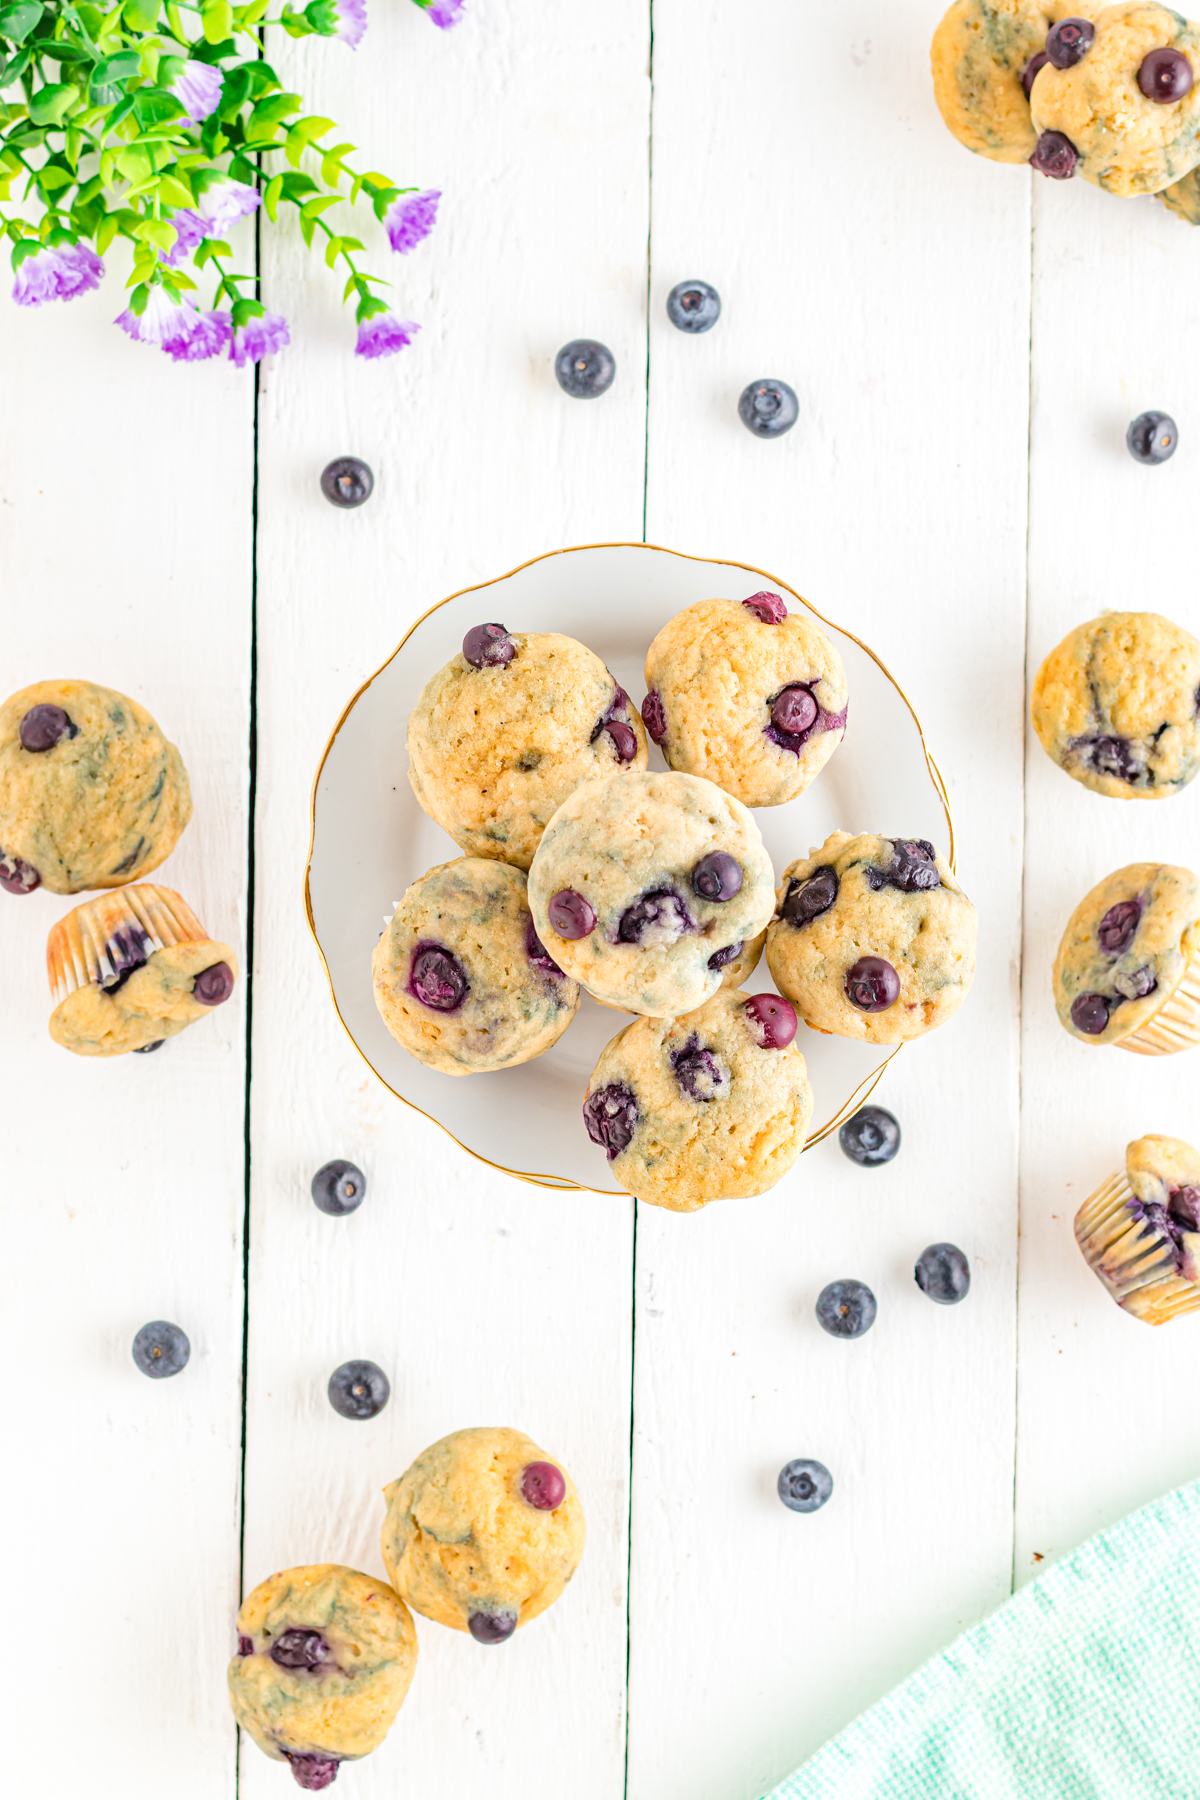 Mini blueberry muffins on table with flowers and fresh blueberries.